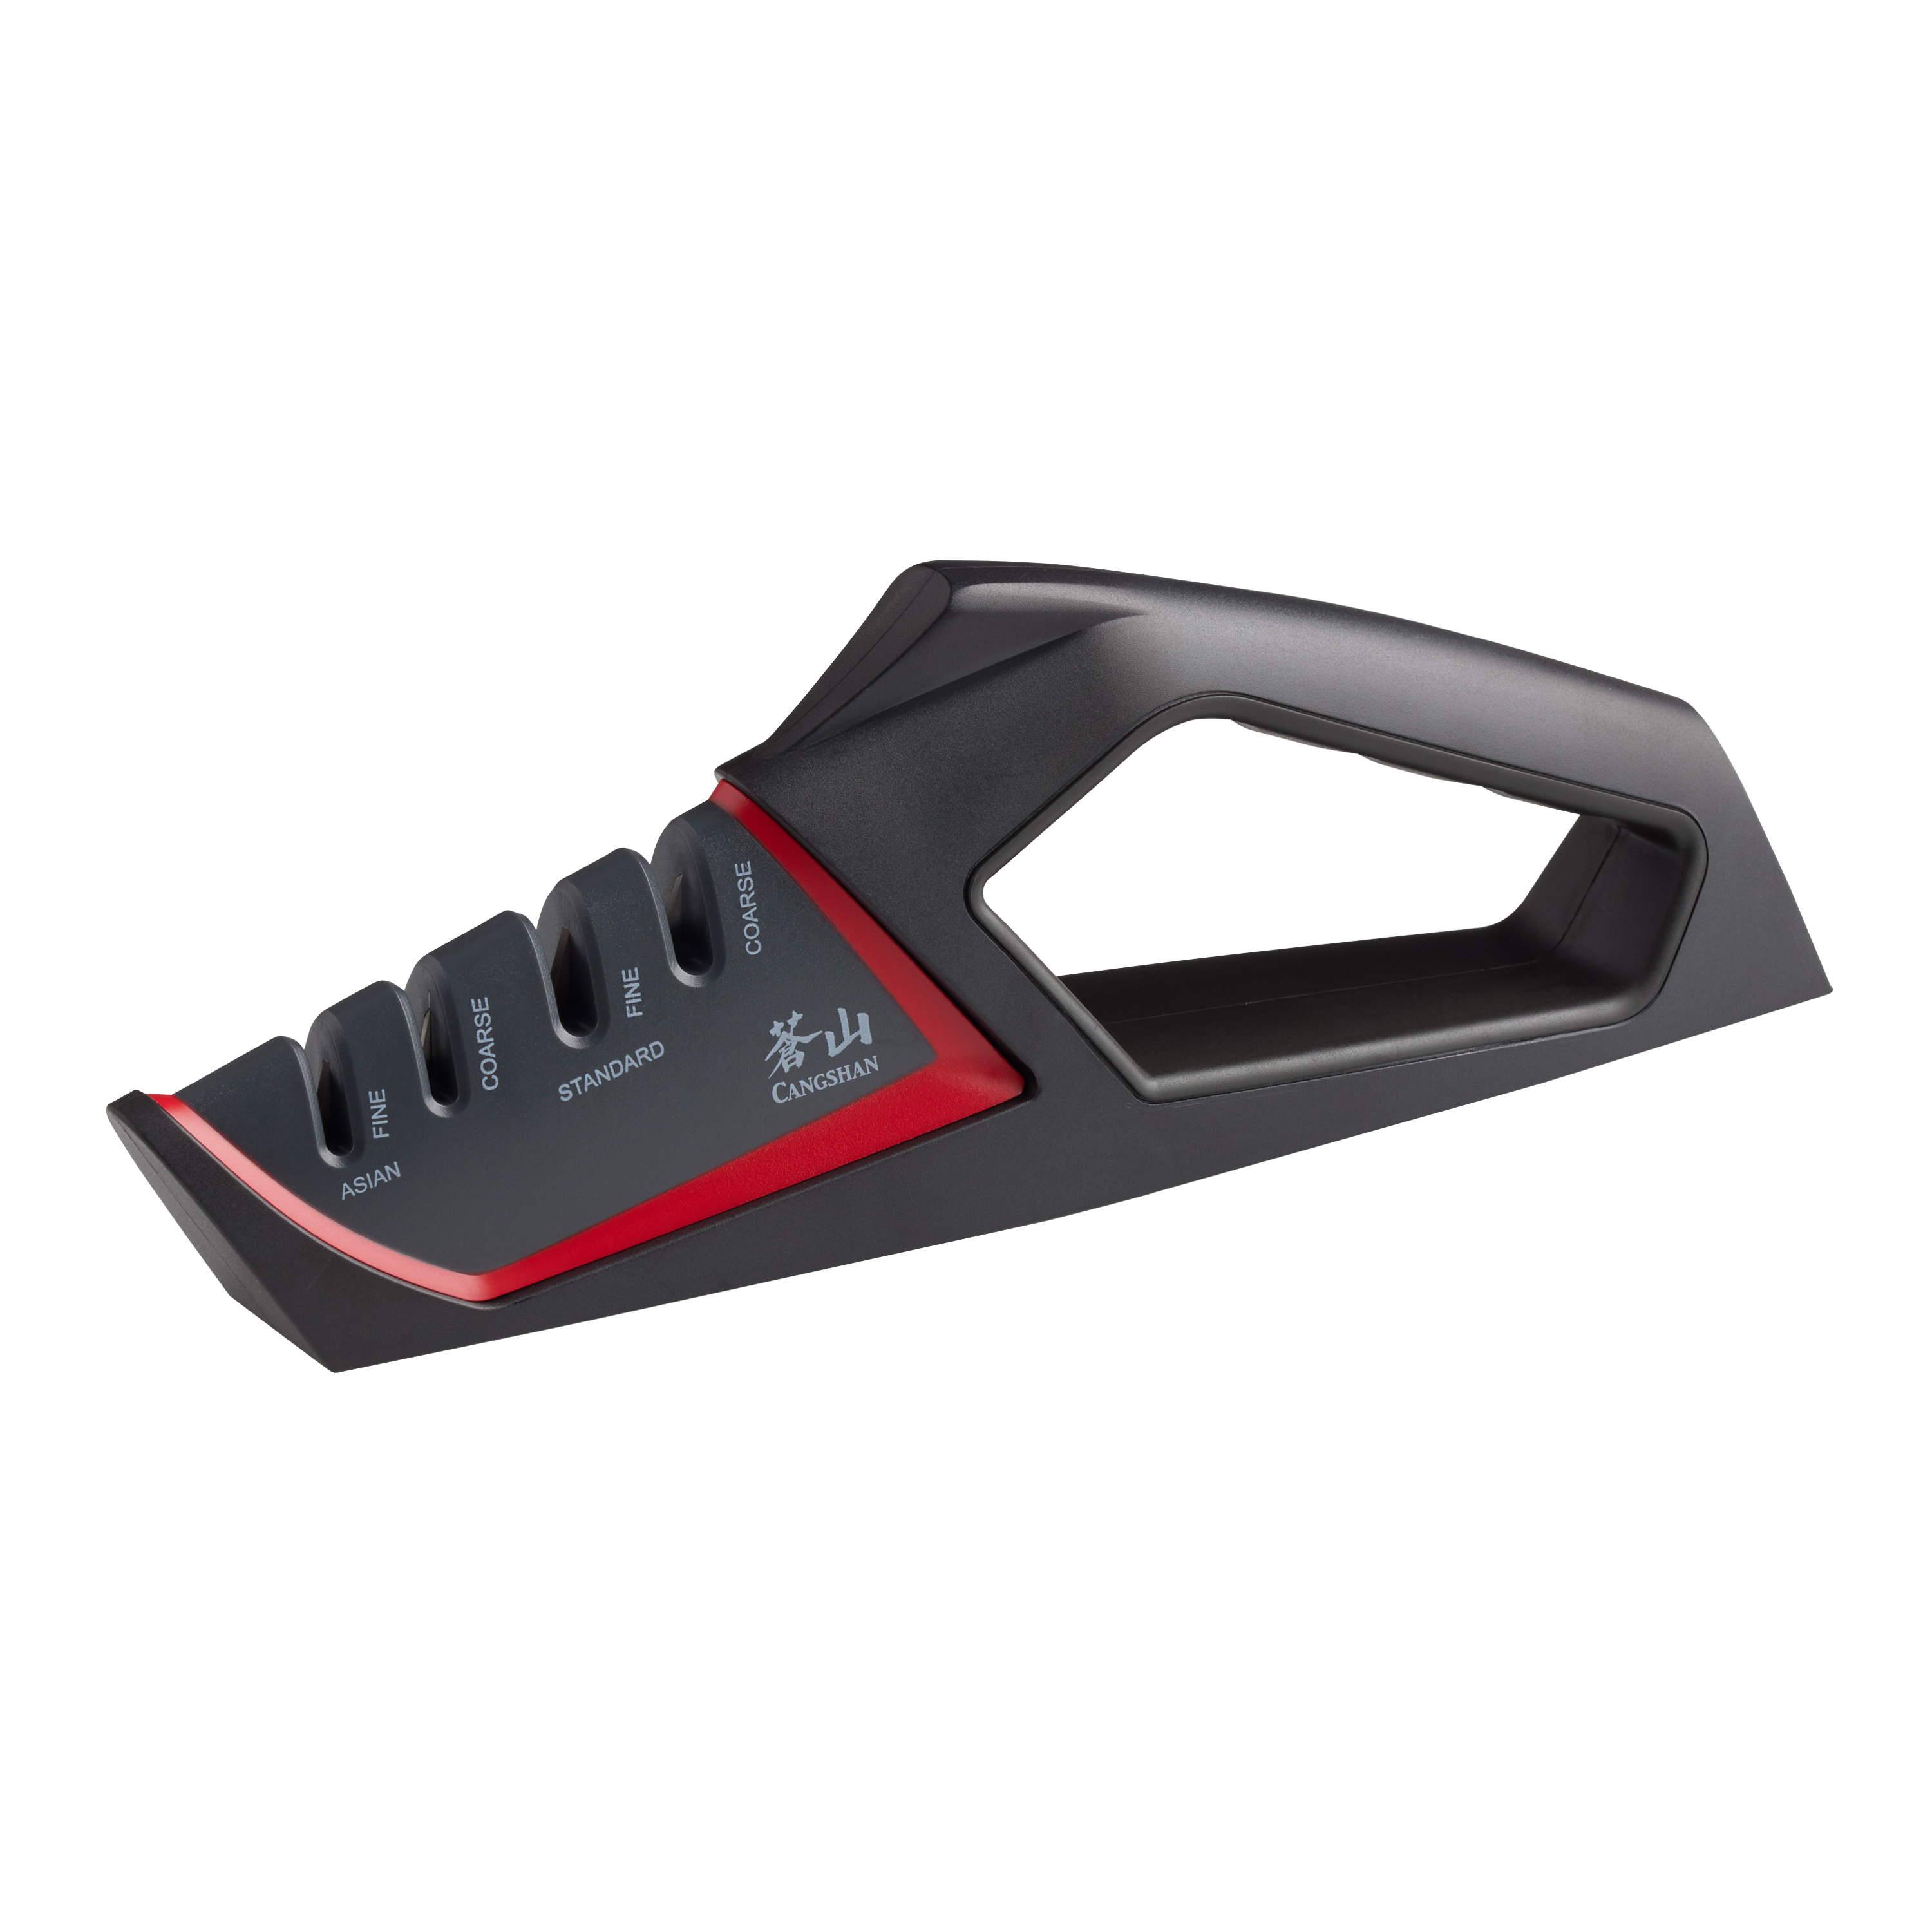 SHARK Series 4-Stage Knife Sharpener, Red, 1026818 – Cangshan Cutlery  Company